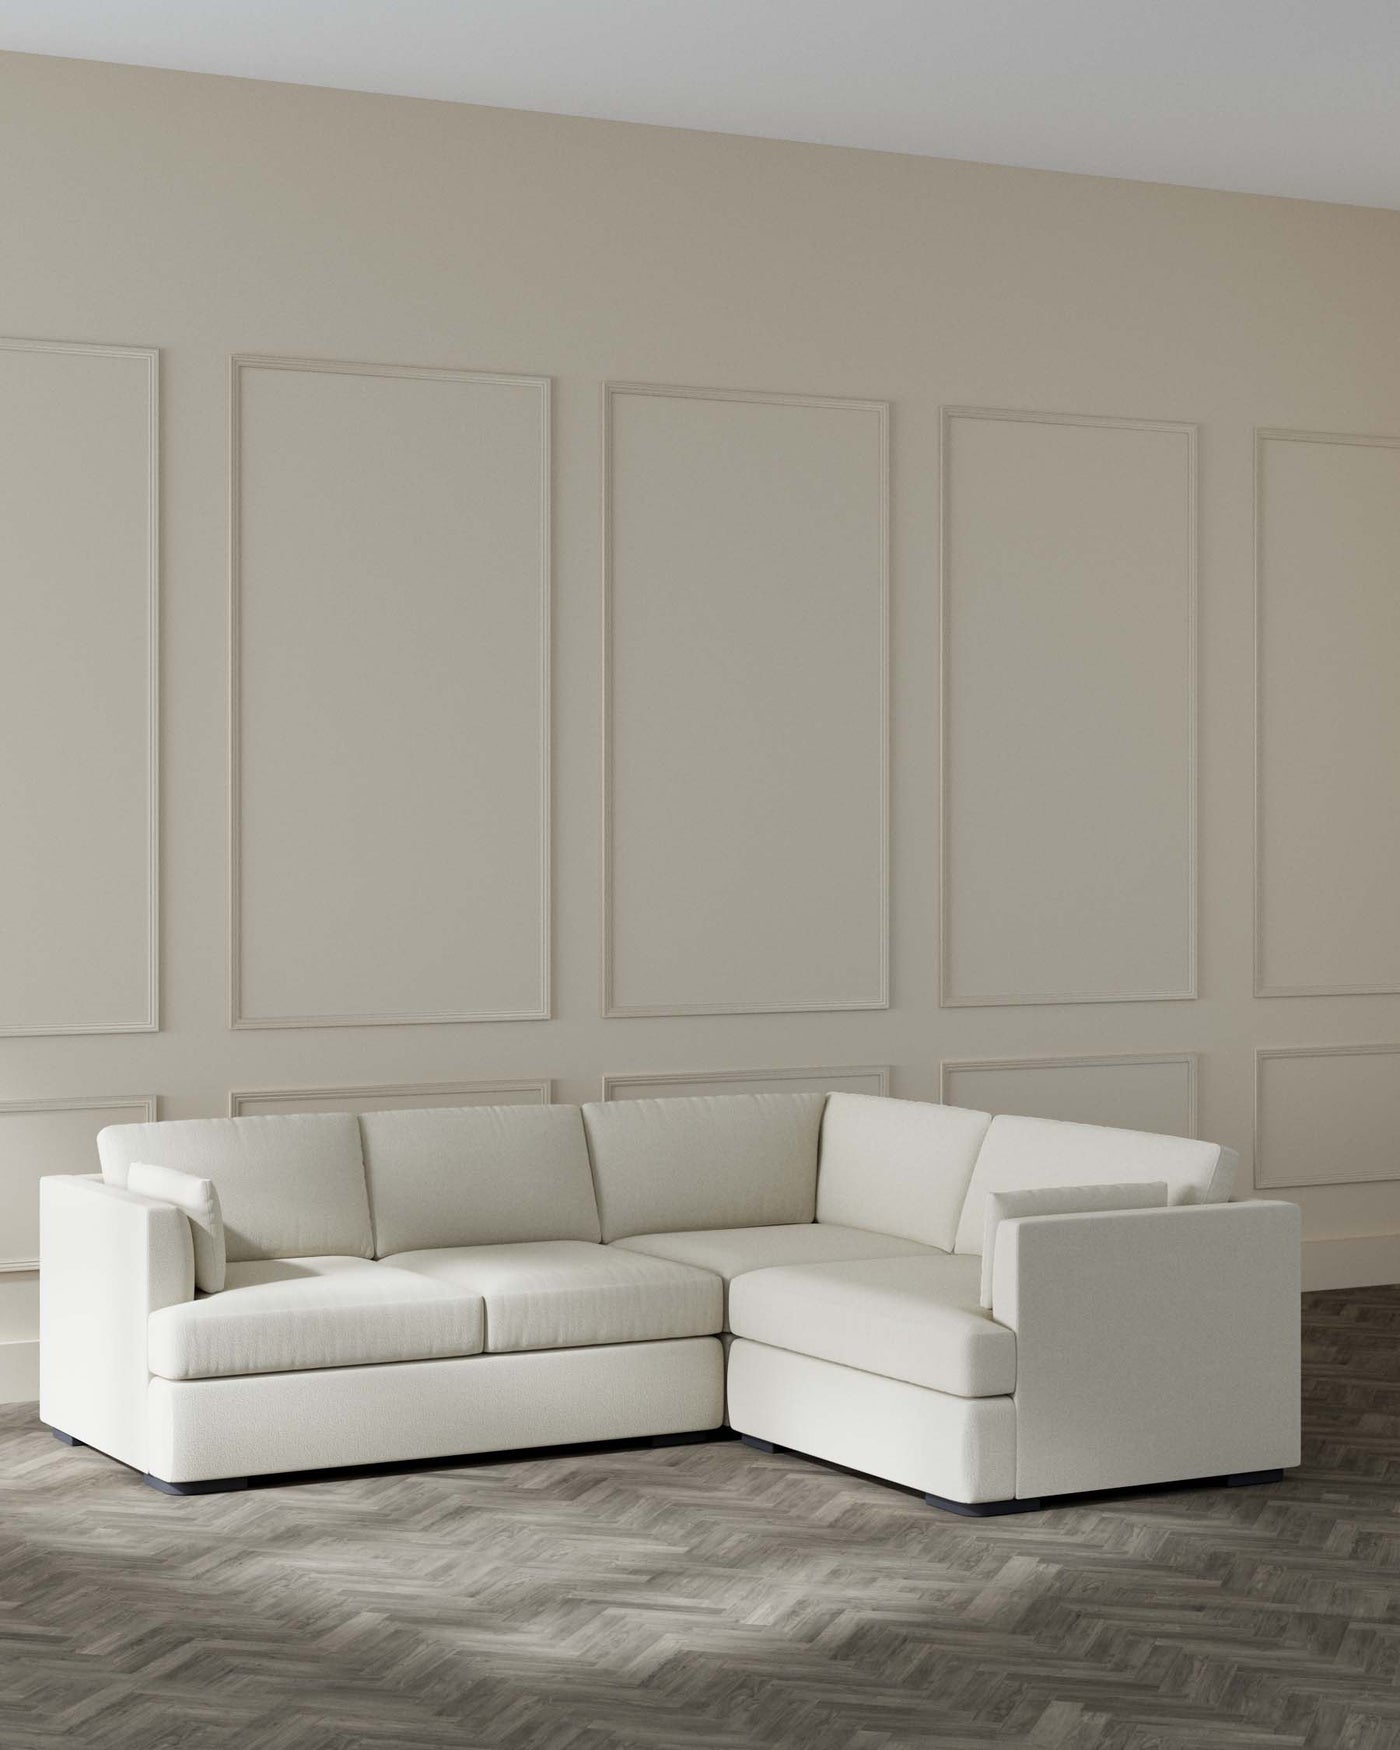 An elegant, contemporary L-shaped sectional sofa with plush, light beige upholstered cushions and a clean-line design. The sofa is positioned in a minimalist setting with a neutral-coloured wall and herringbone-patterned wood flooring.